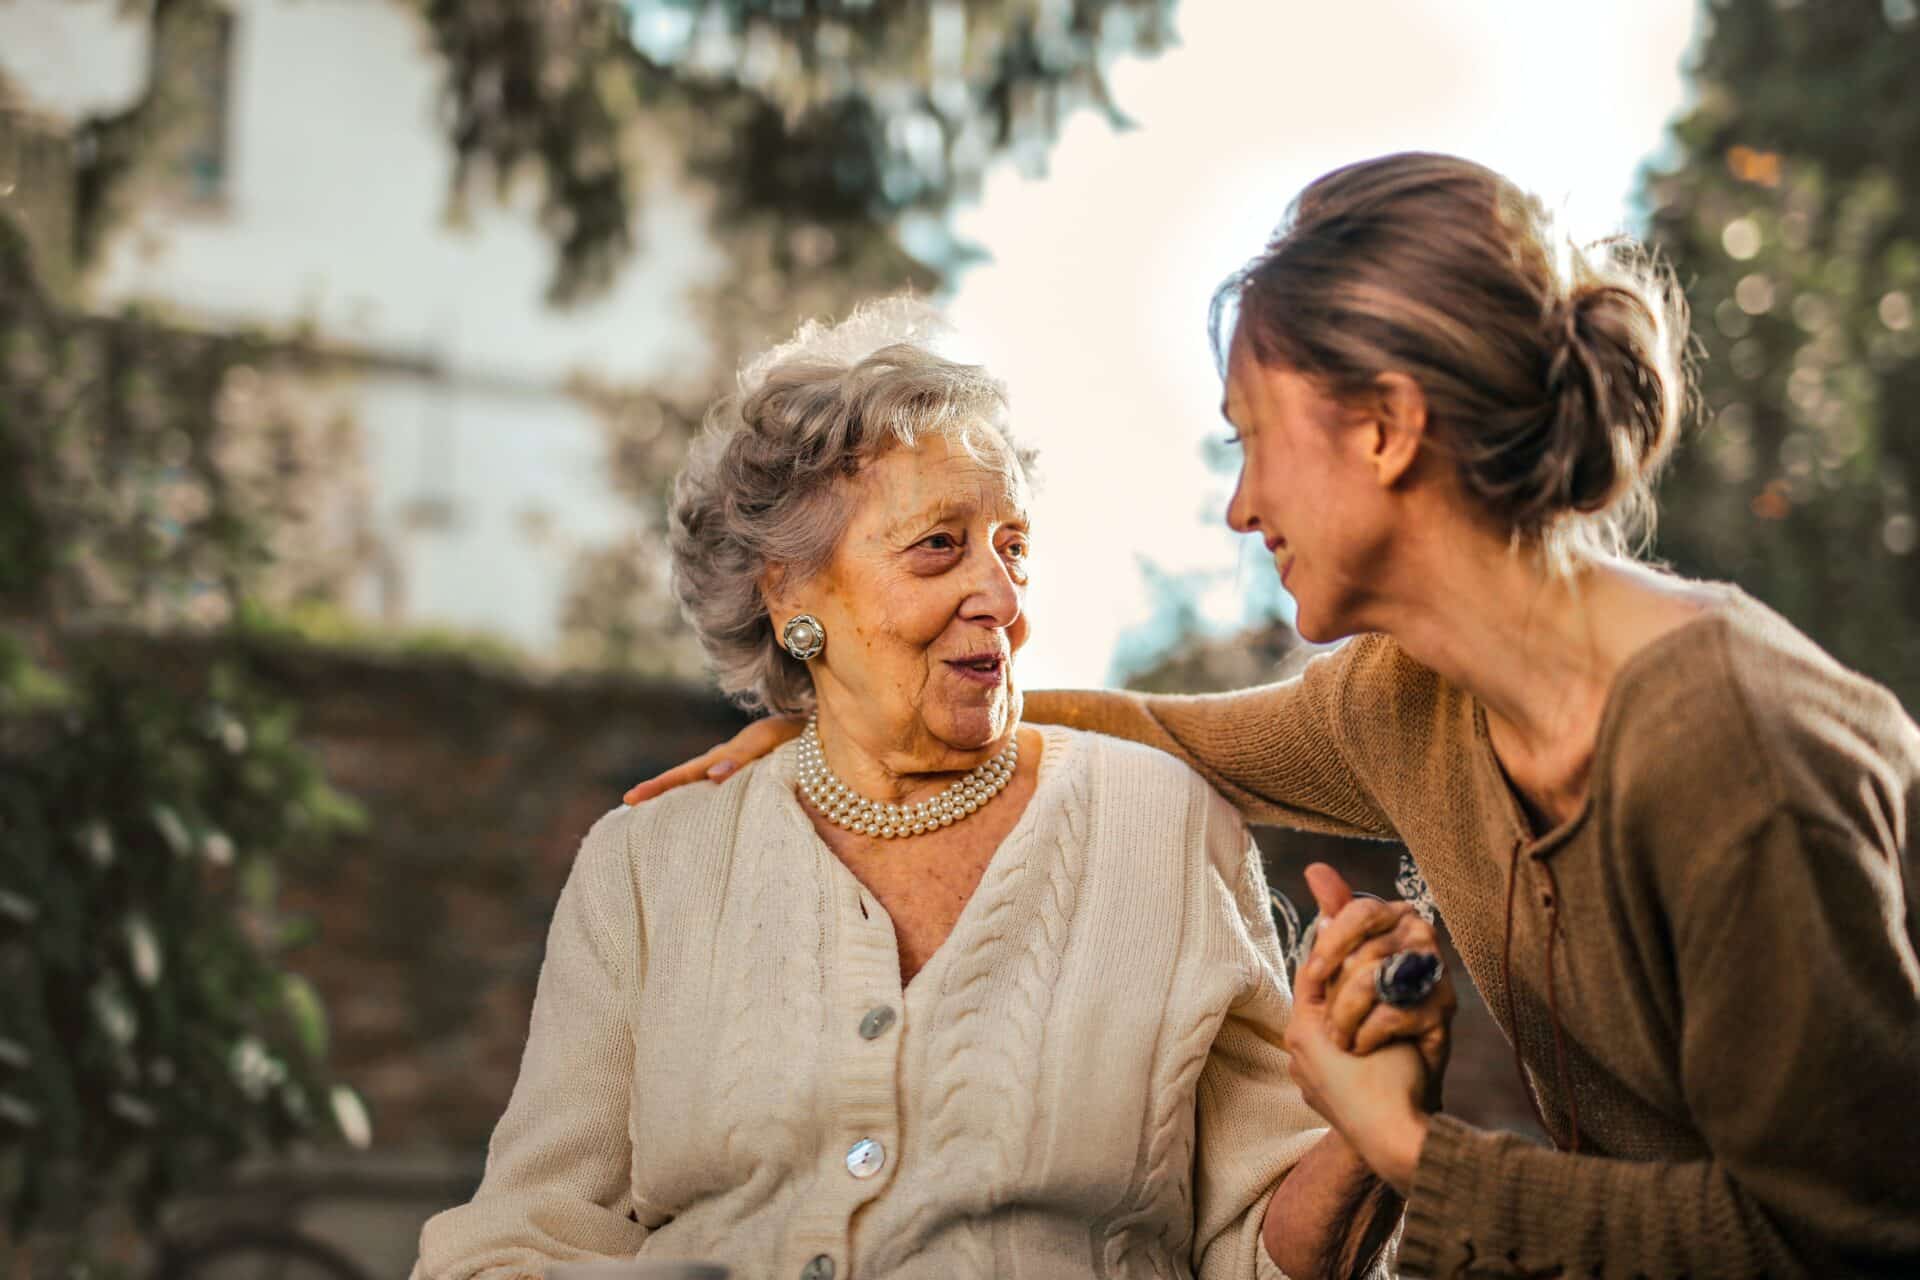 A young woman talking with an elderly woman while holding her hand.